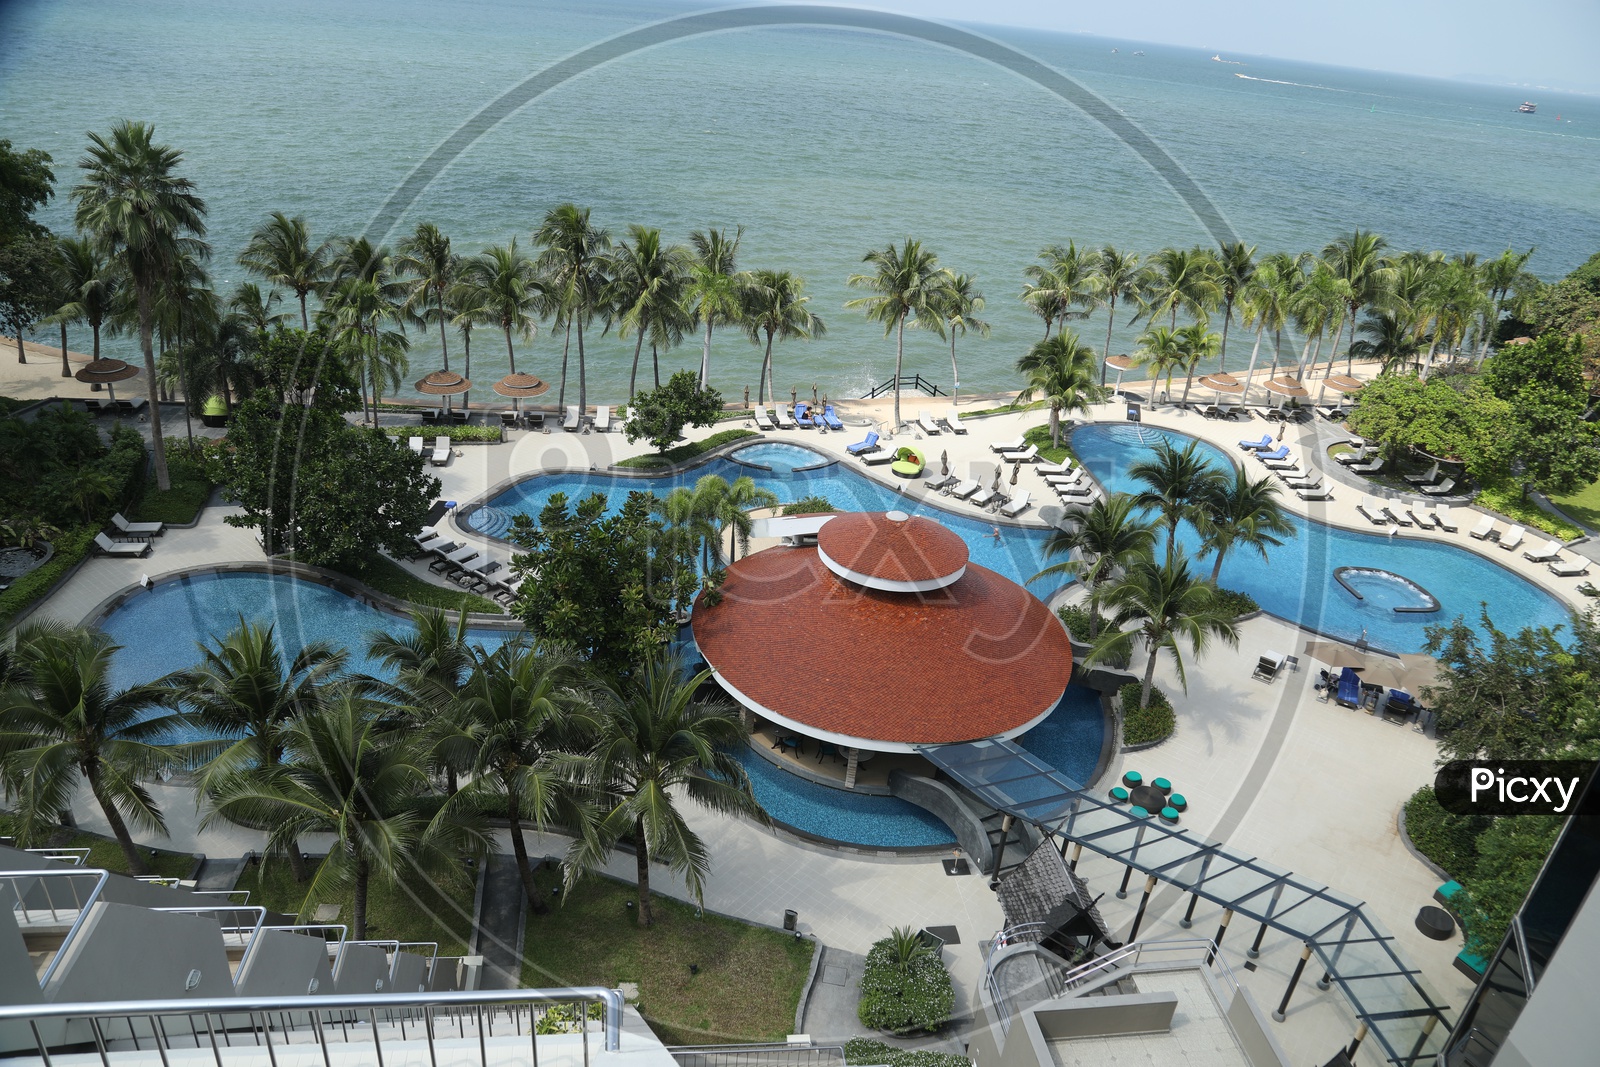 A Resort with Swimming Pool on a Beach